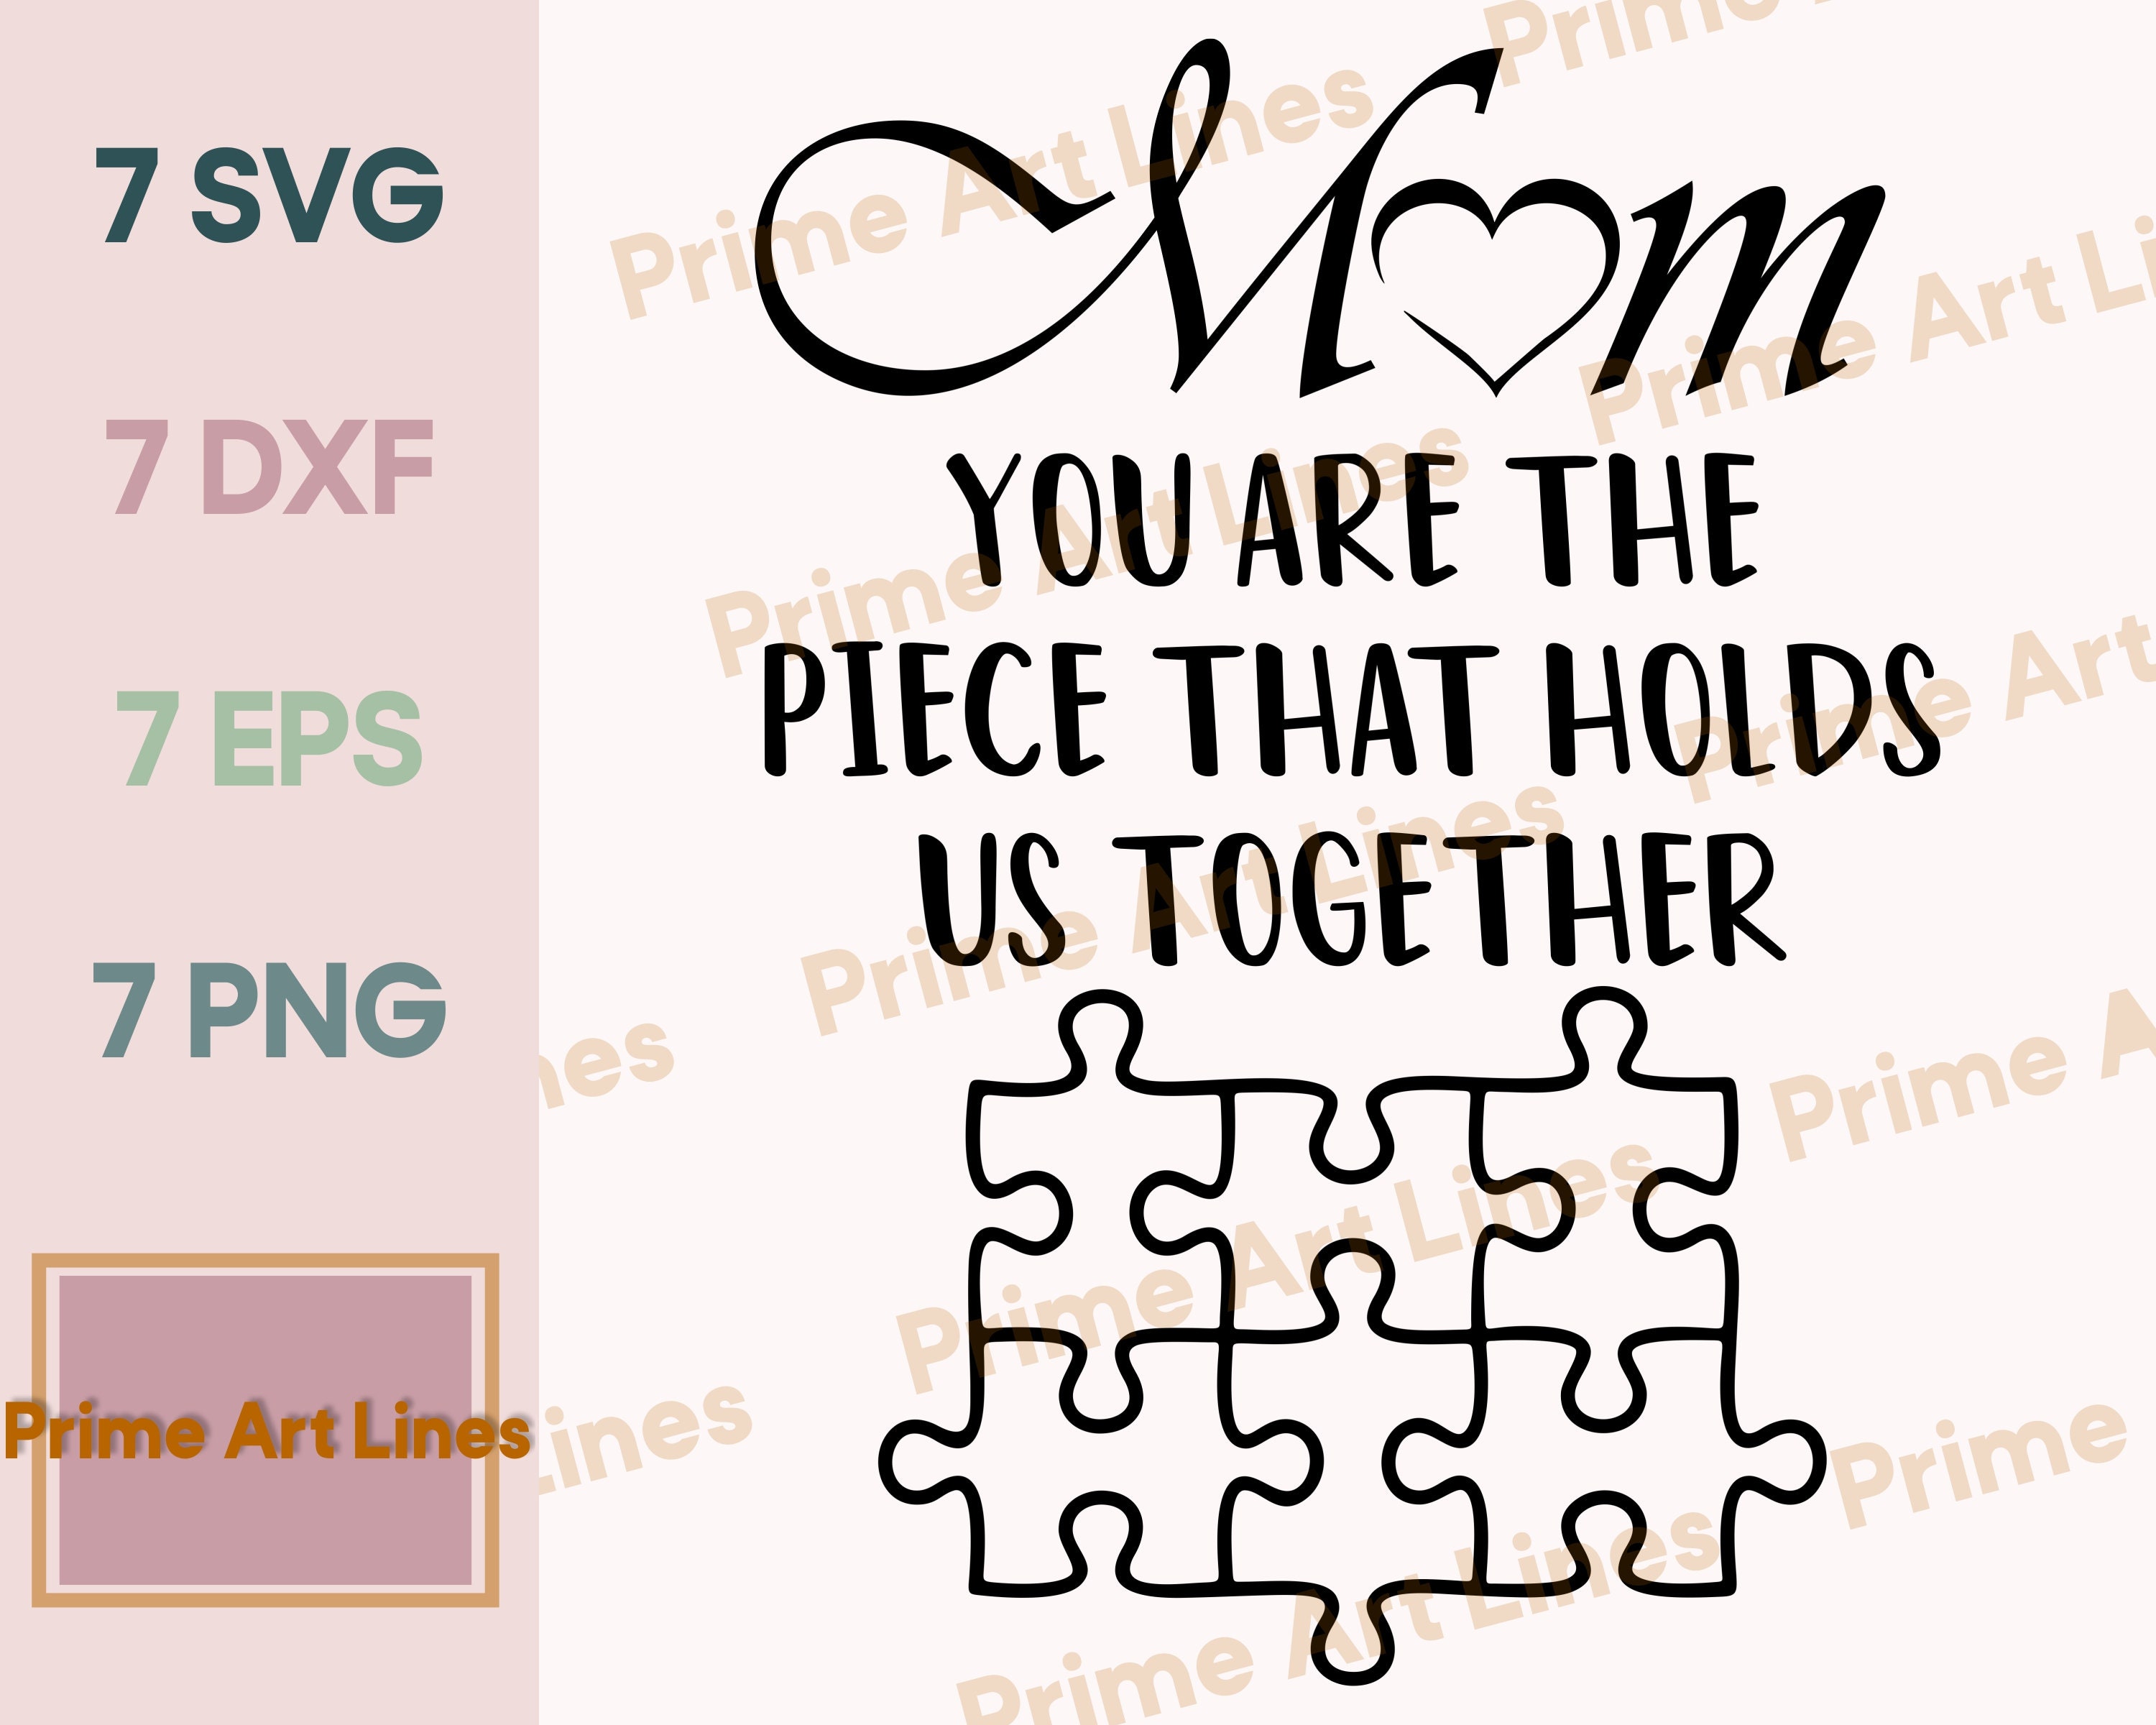 Mom You Are The Piece That Holds Us Together Svg Mom Puzzle Etsy